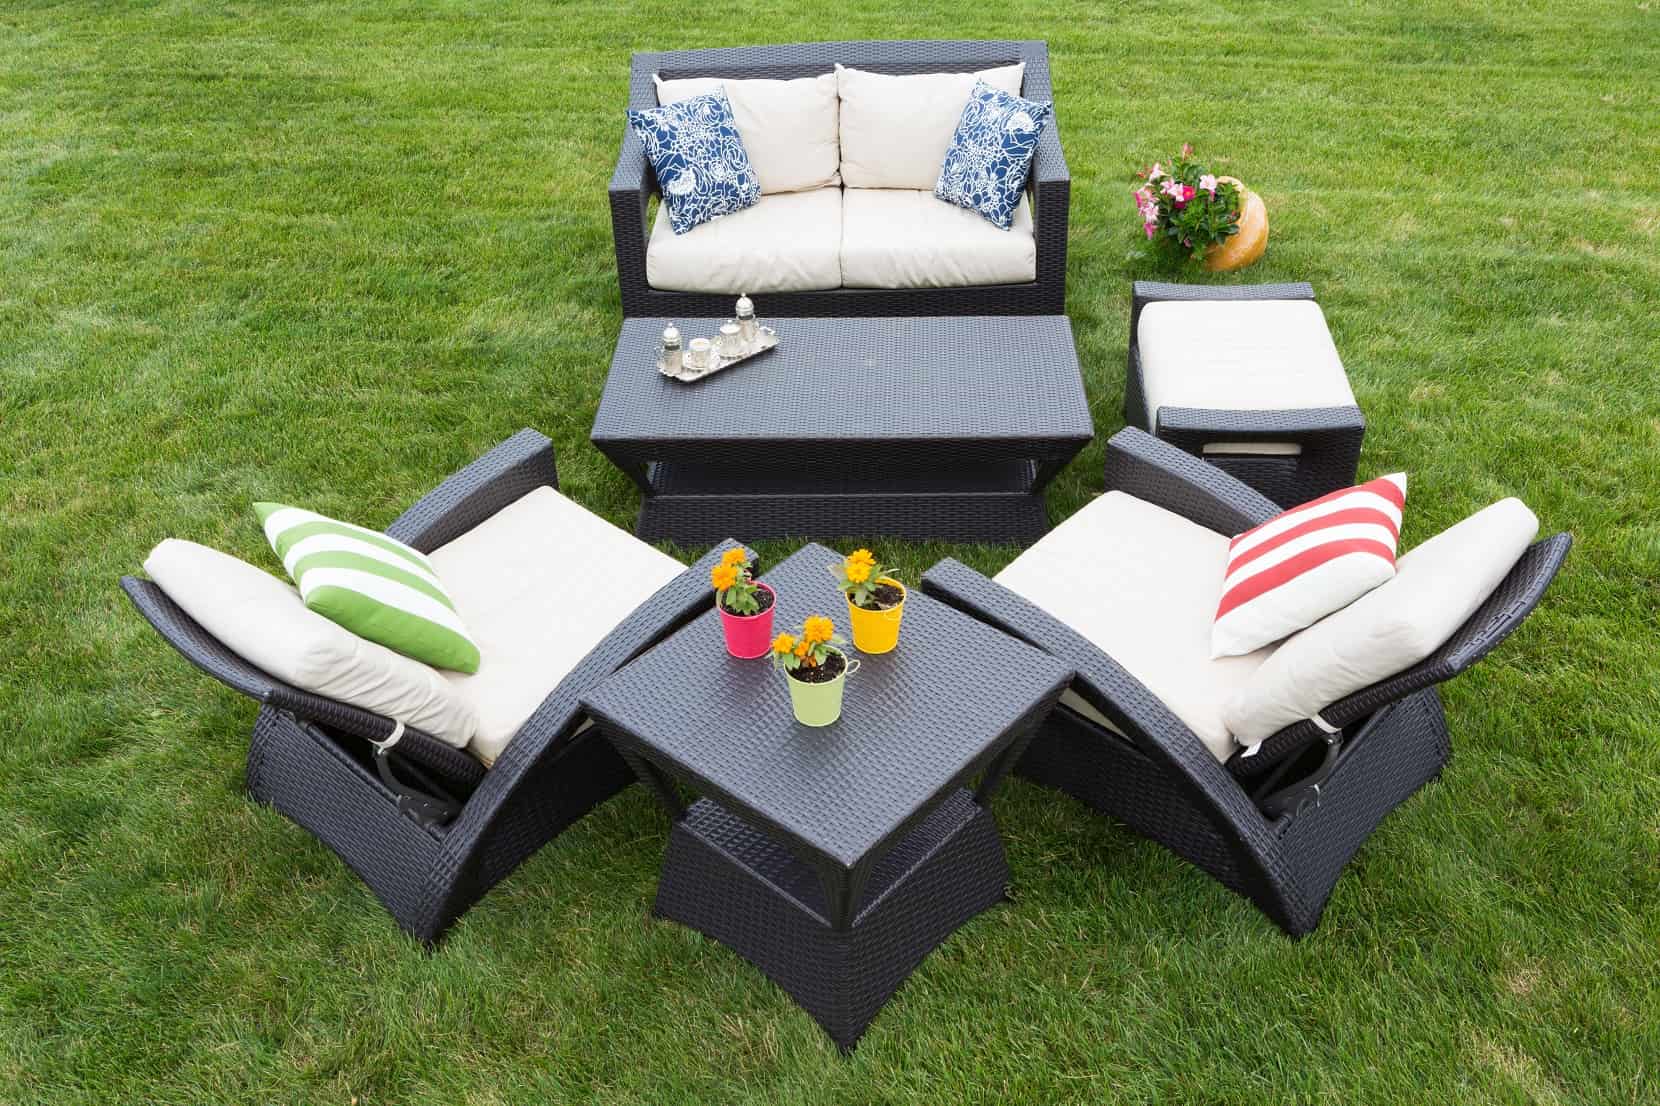 5 Benefits Of Reclining Garden Furniture. Cozy dark rattan furniture with a sofa and the table, and soft pillows